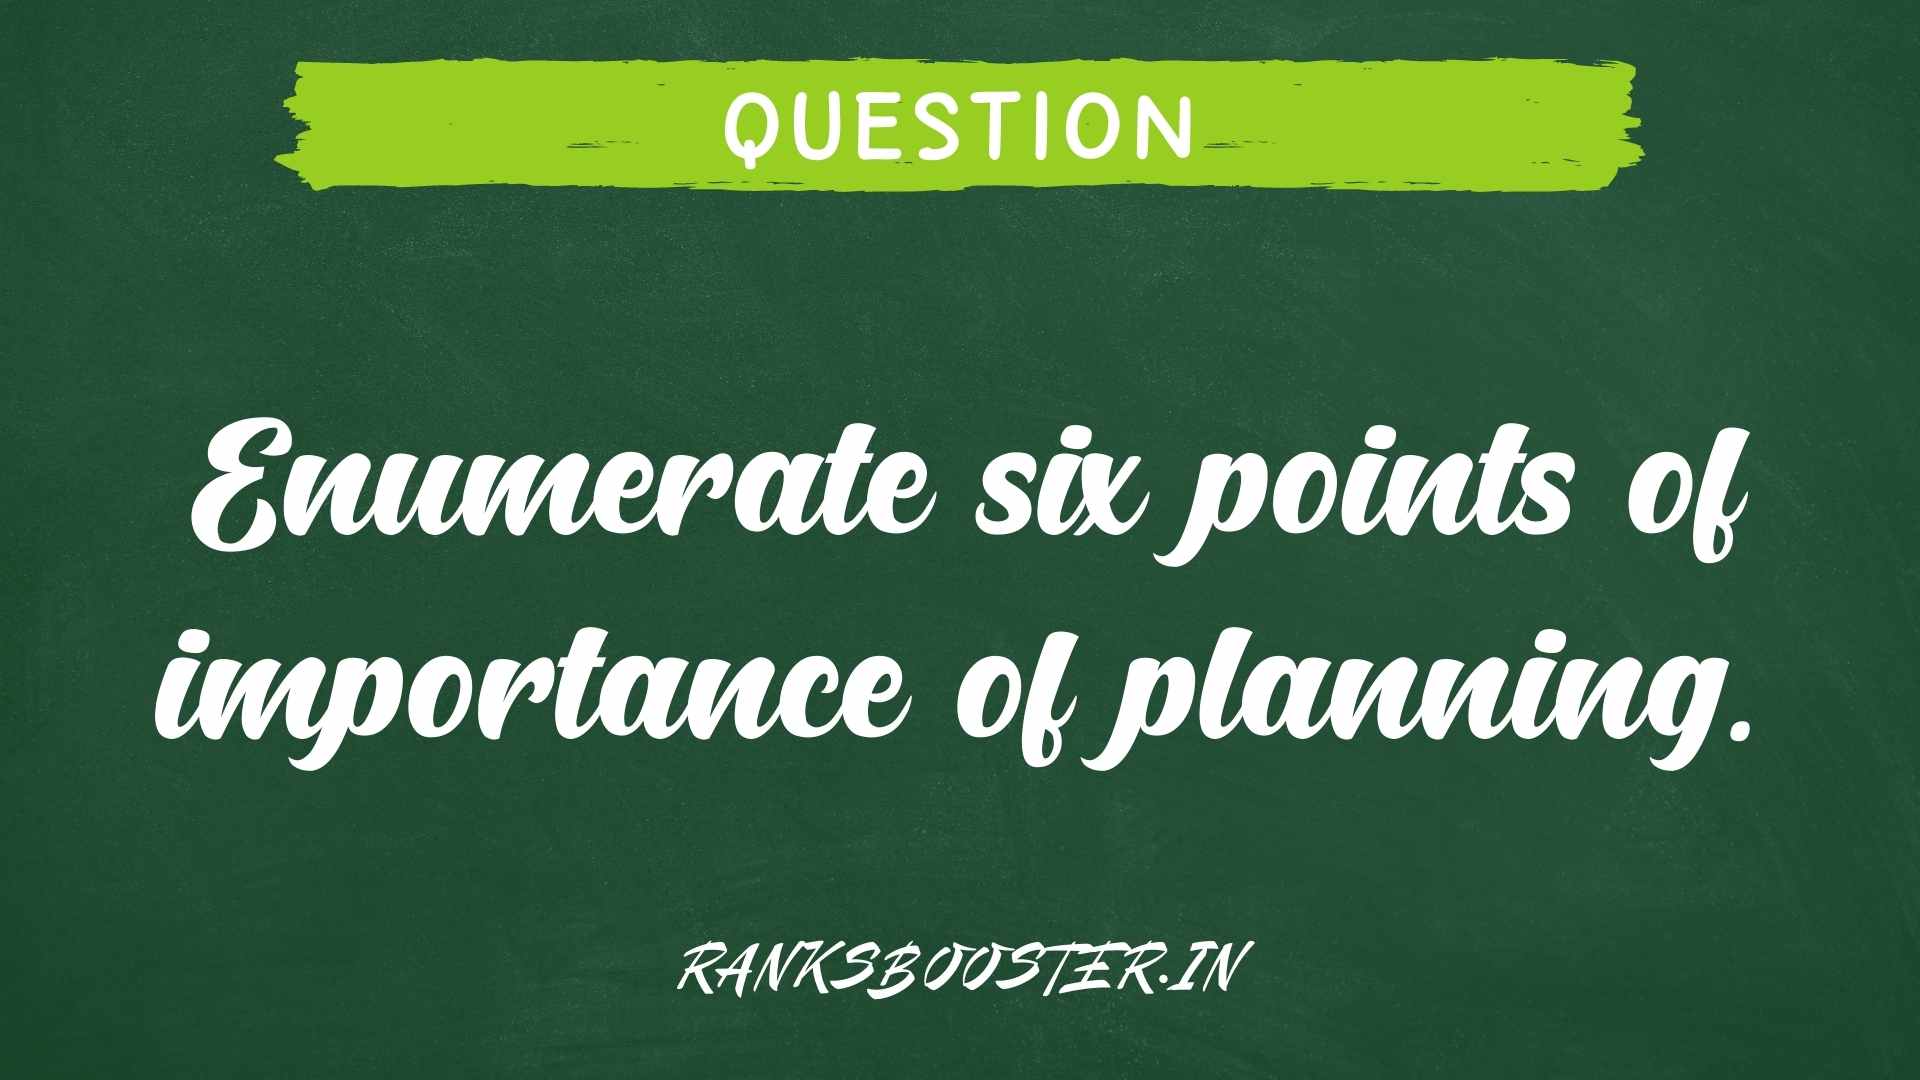 Enumerate six points of importance of planning